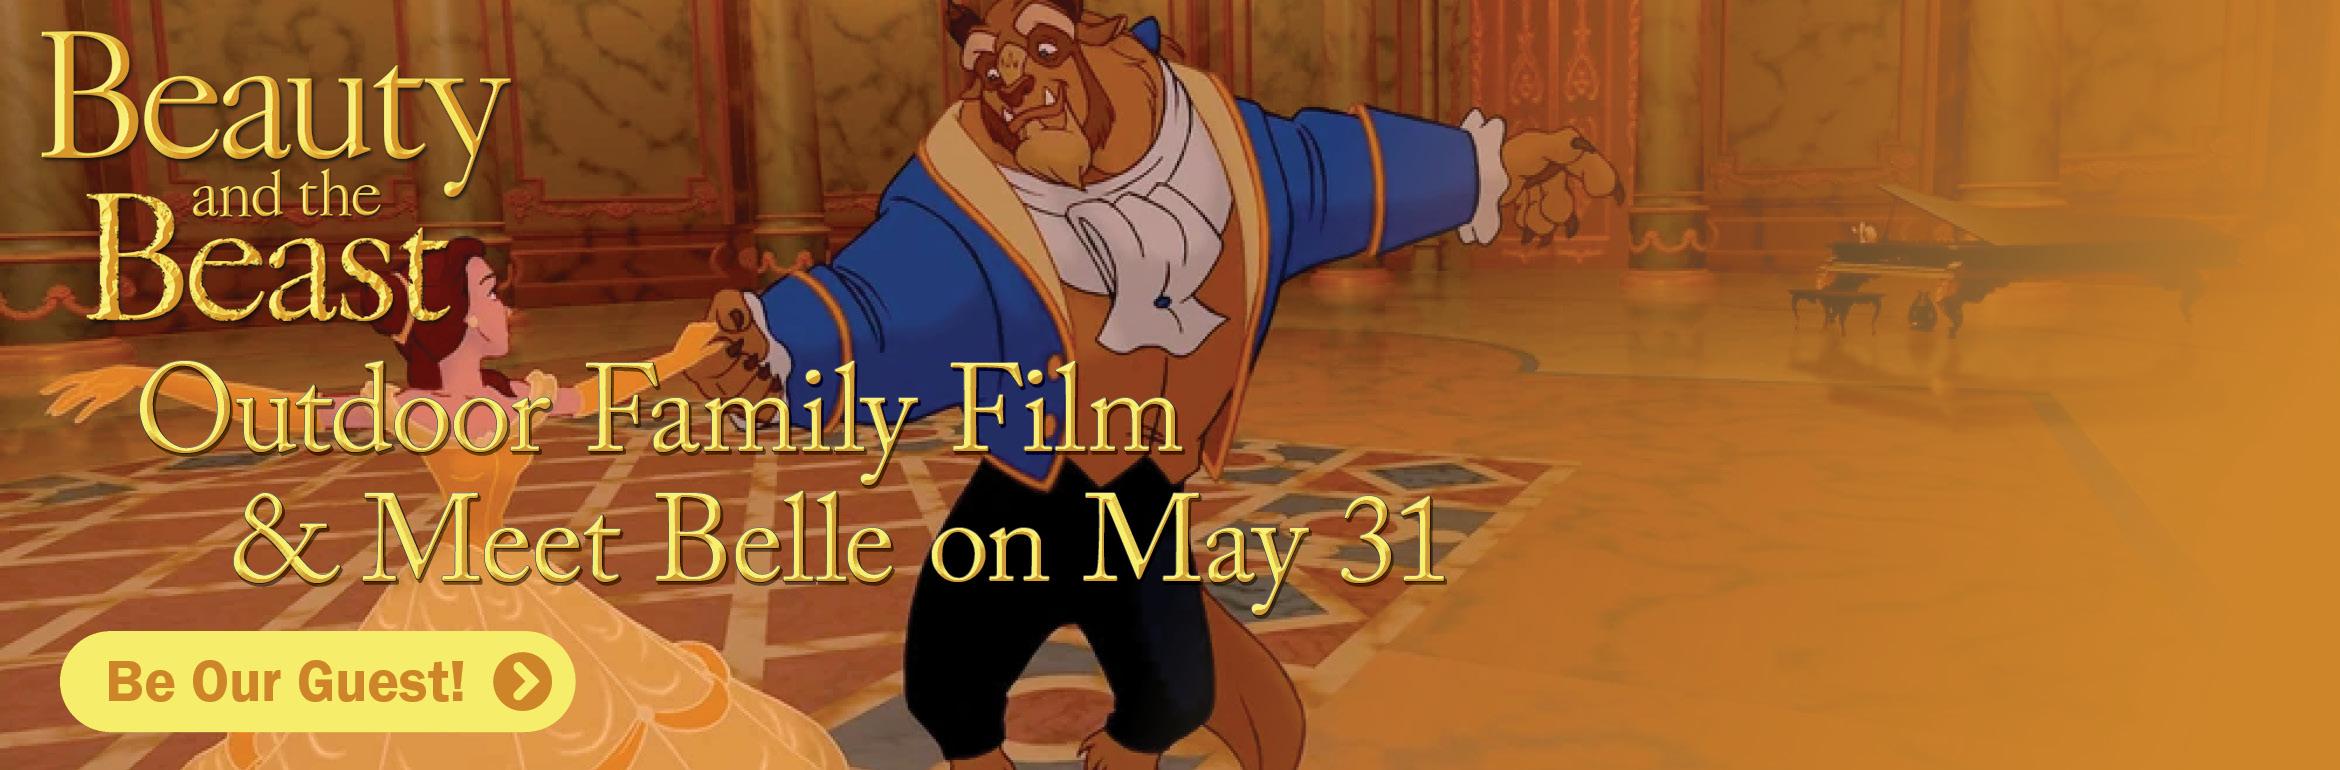 Beauty and the Beast. Outdoor Family Film & Meet Belle on May 31. Be Our Guest!